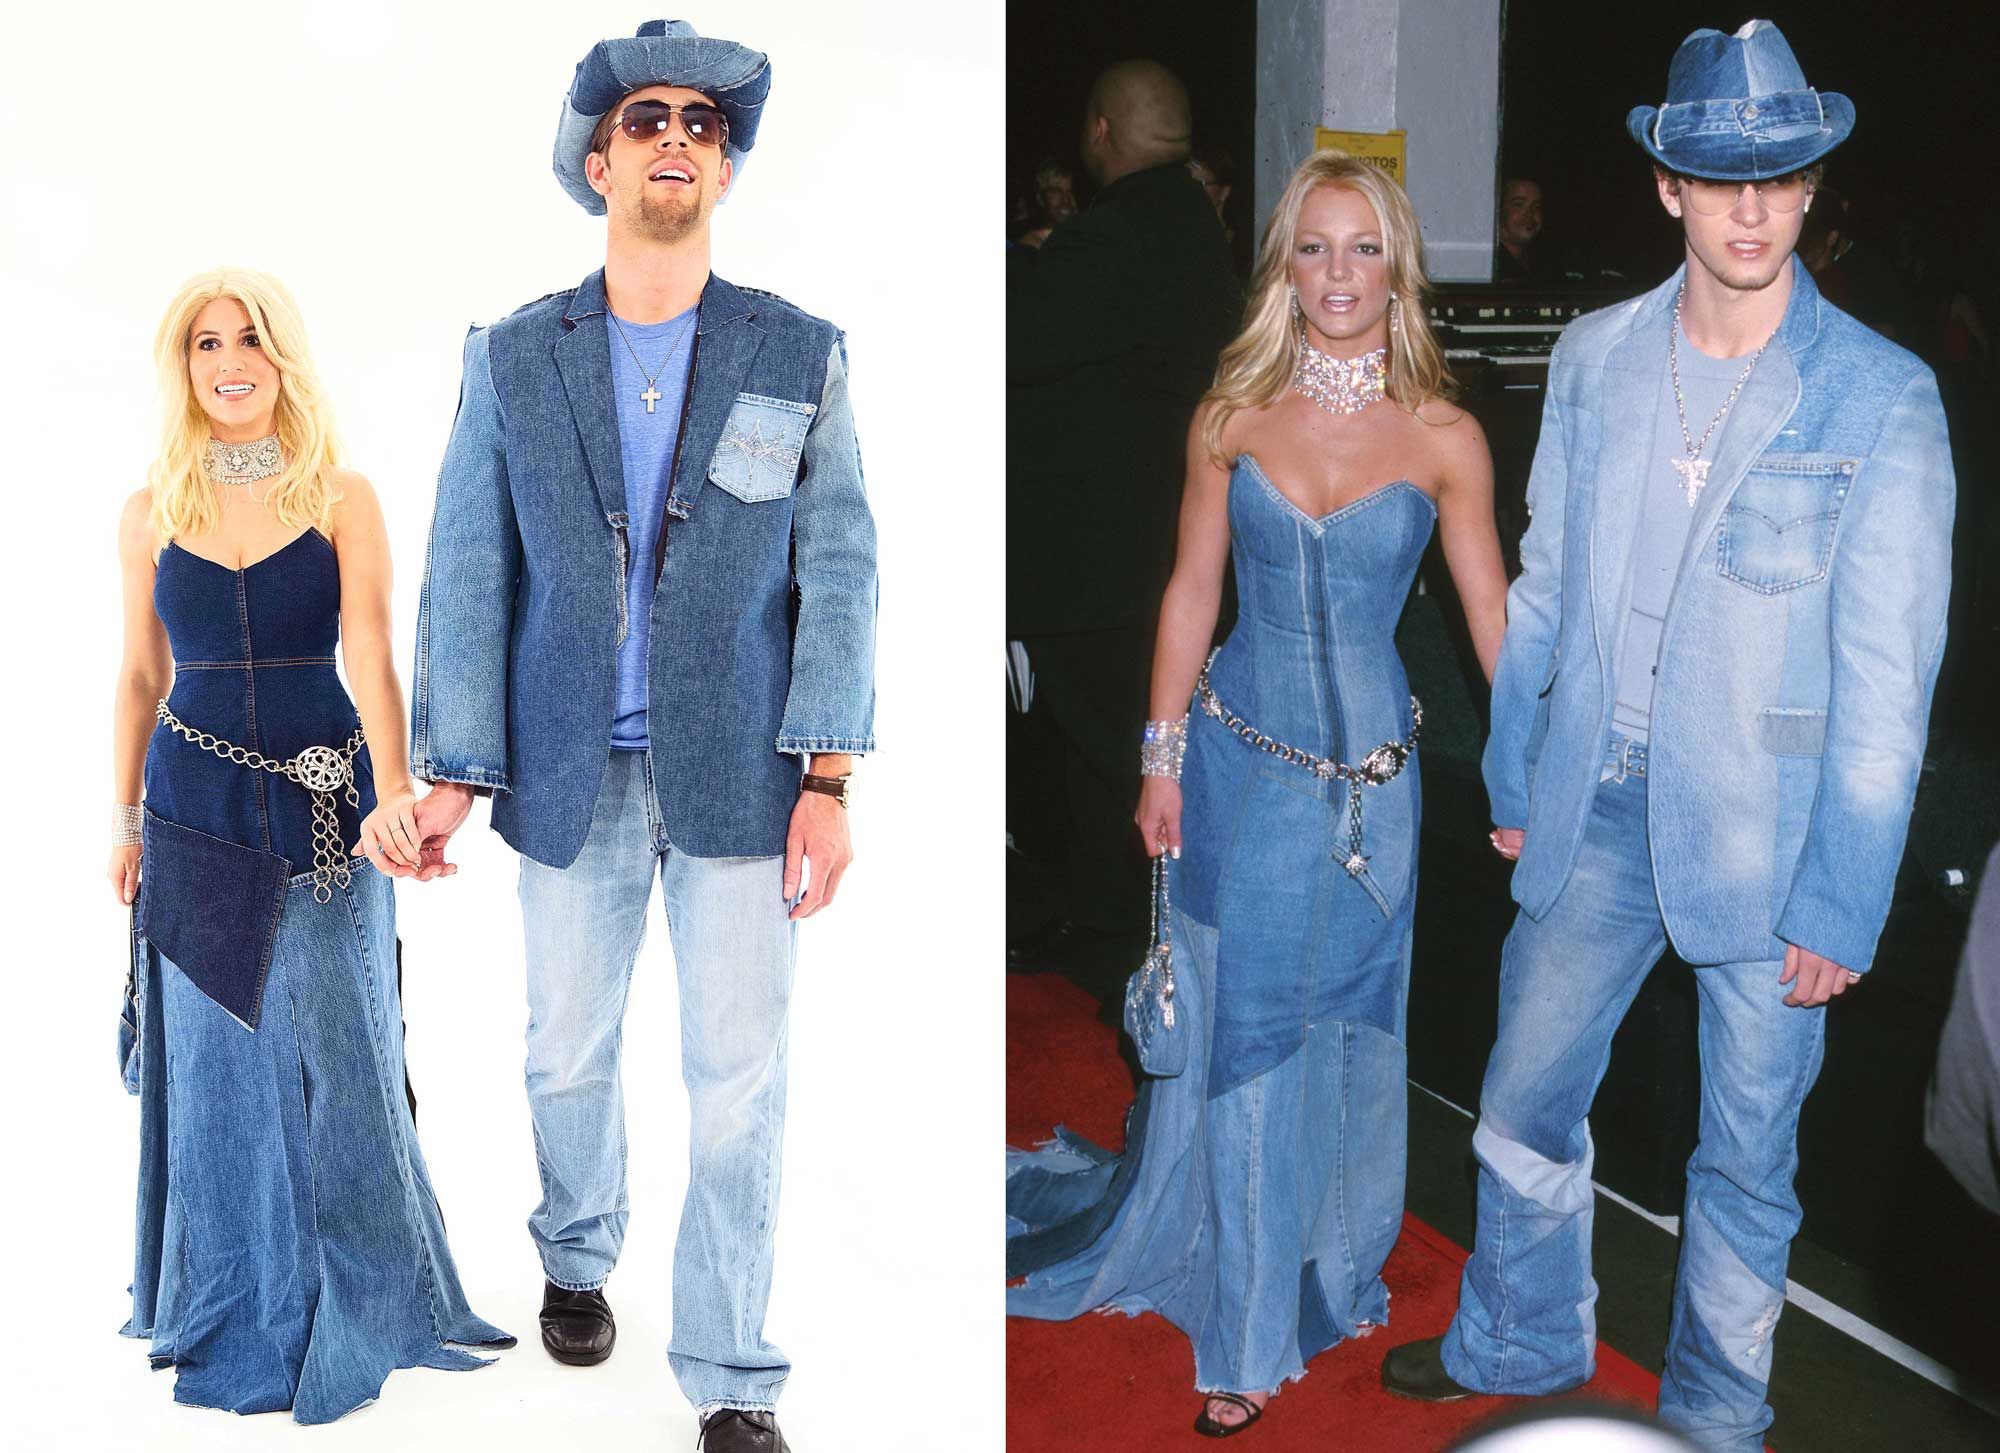 Justin Timberlake on double denim outfit photo: 'If you wear denim on denim,  it will get documented' | Gold Coast Bulletin